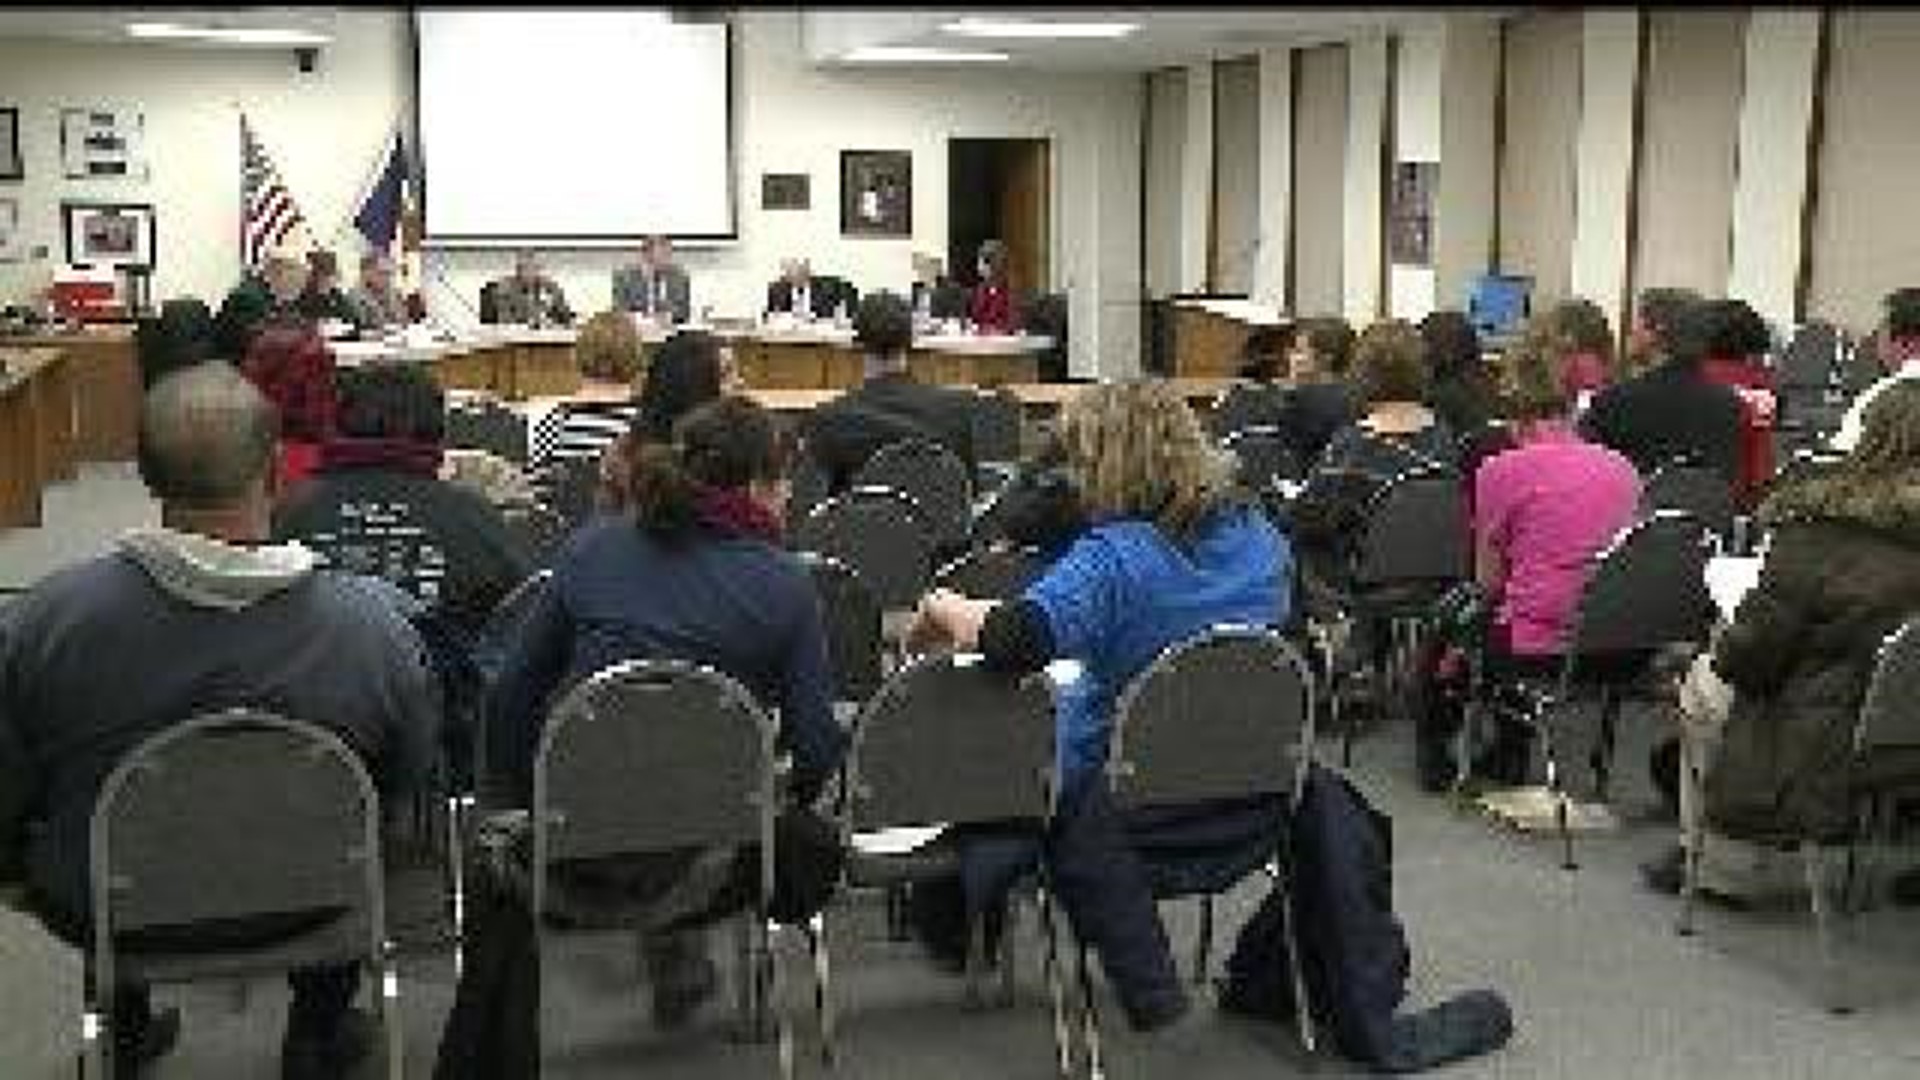 School board votes to end contract